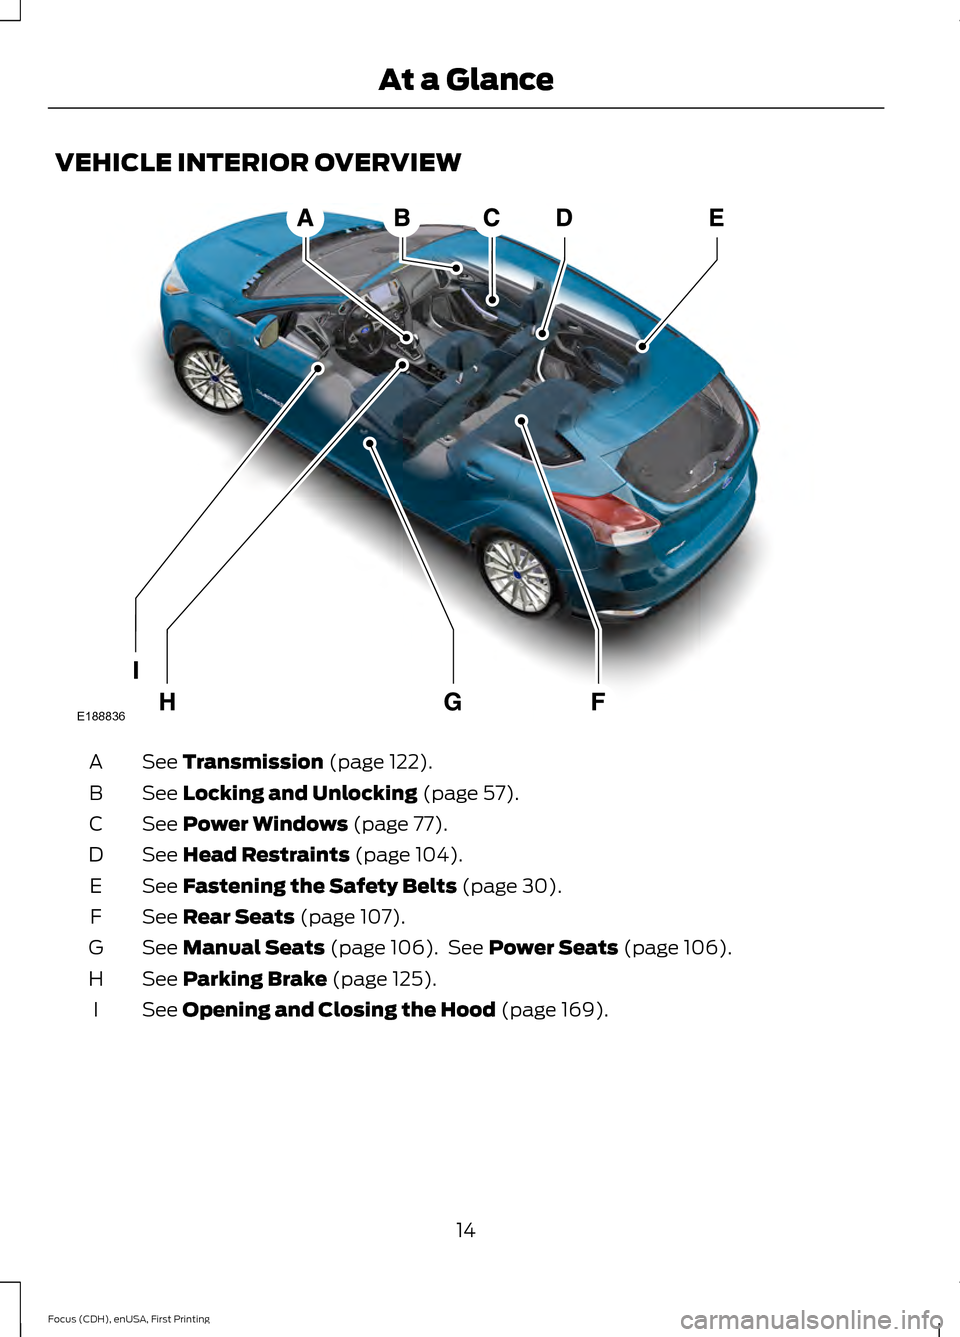 FORD FOCUS ELECTRIC 2015 3.G Owners Manual VEHICLE INTERIOR OVERVIEW
See Transmission (page 122).
A
See 
Locking and Unlocking (page 57).
B
See 
Power Windows (page 77).
C
See 
Head Restraints (page 104).
D
See 
Fastening the Safety Belts (pag